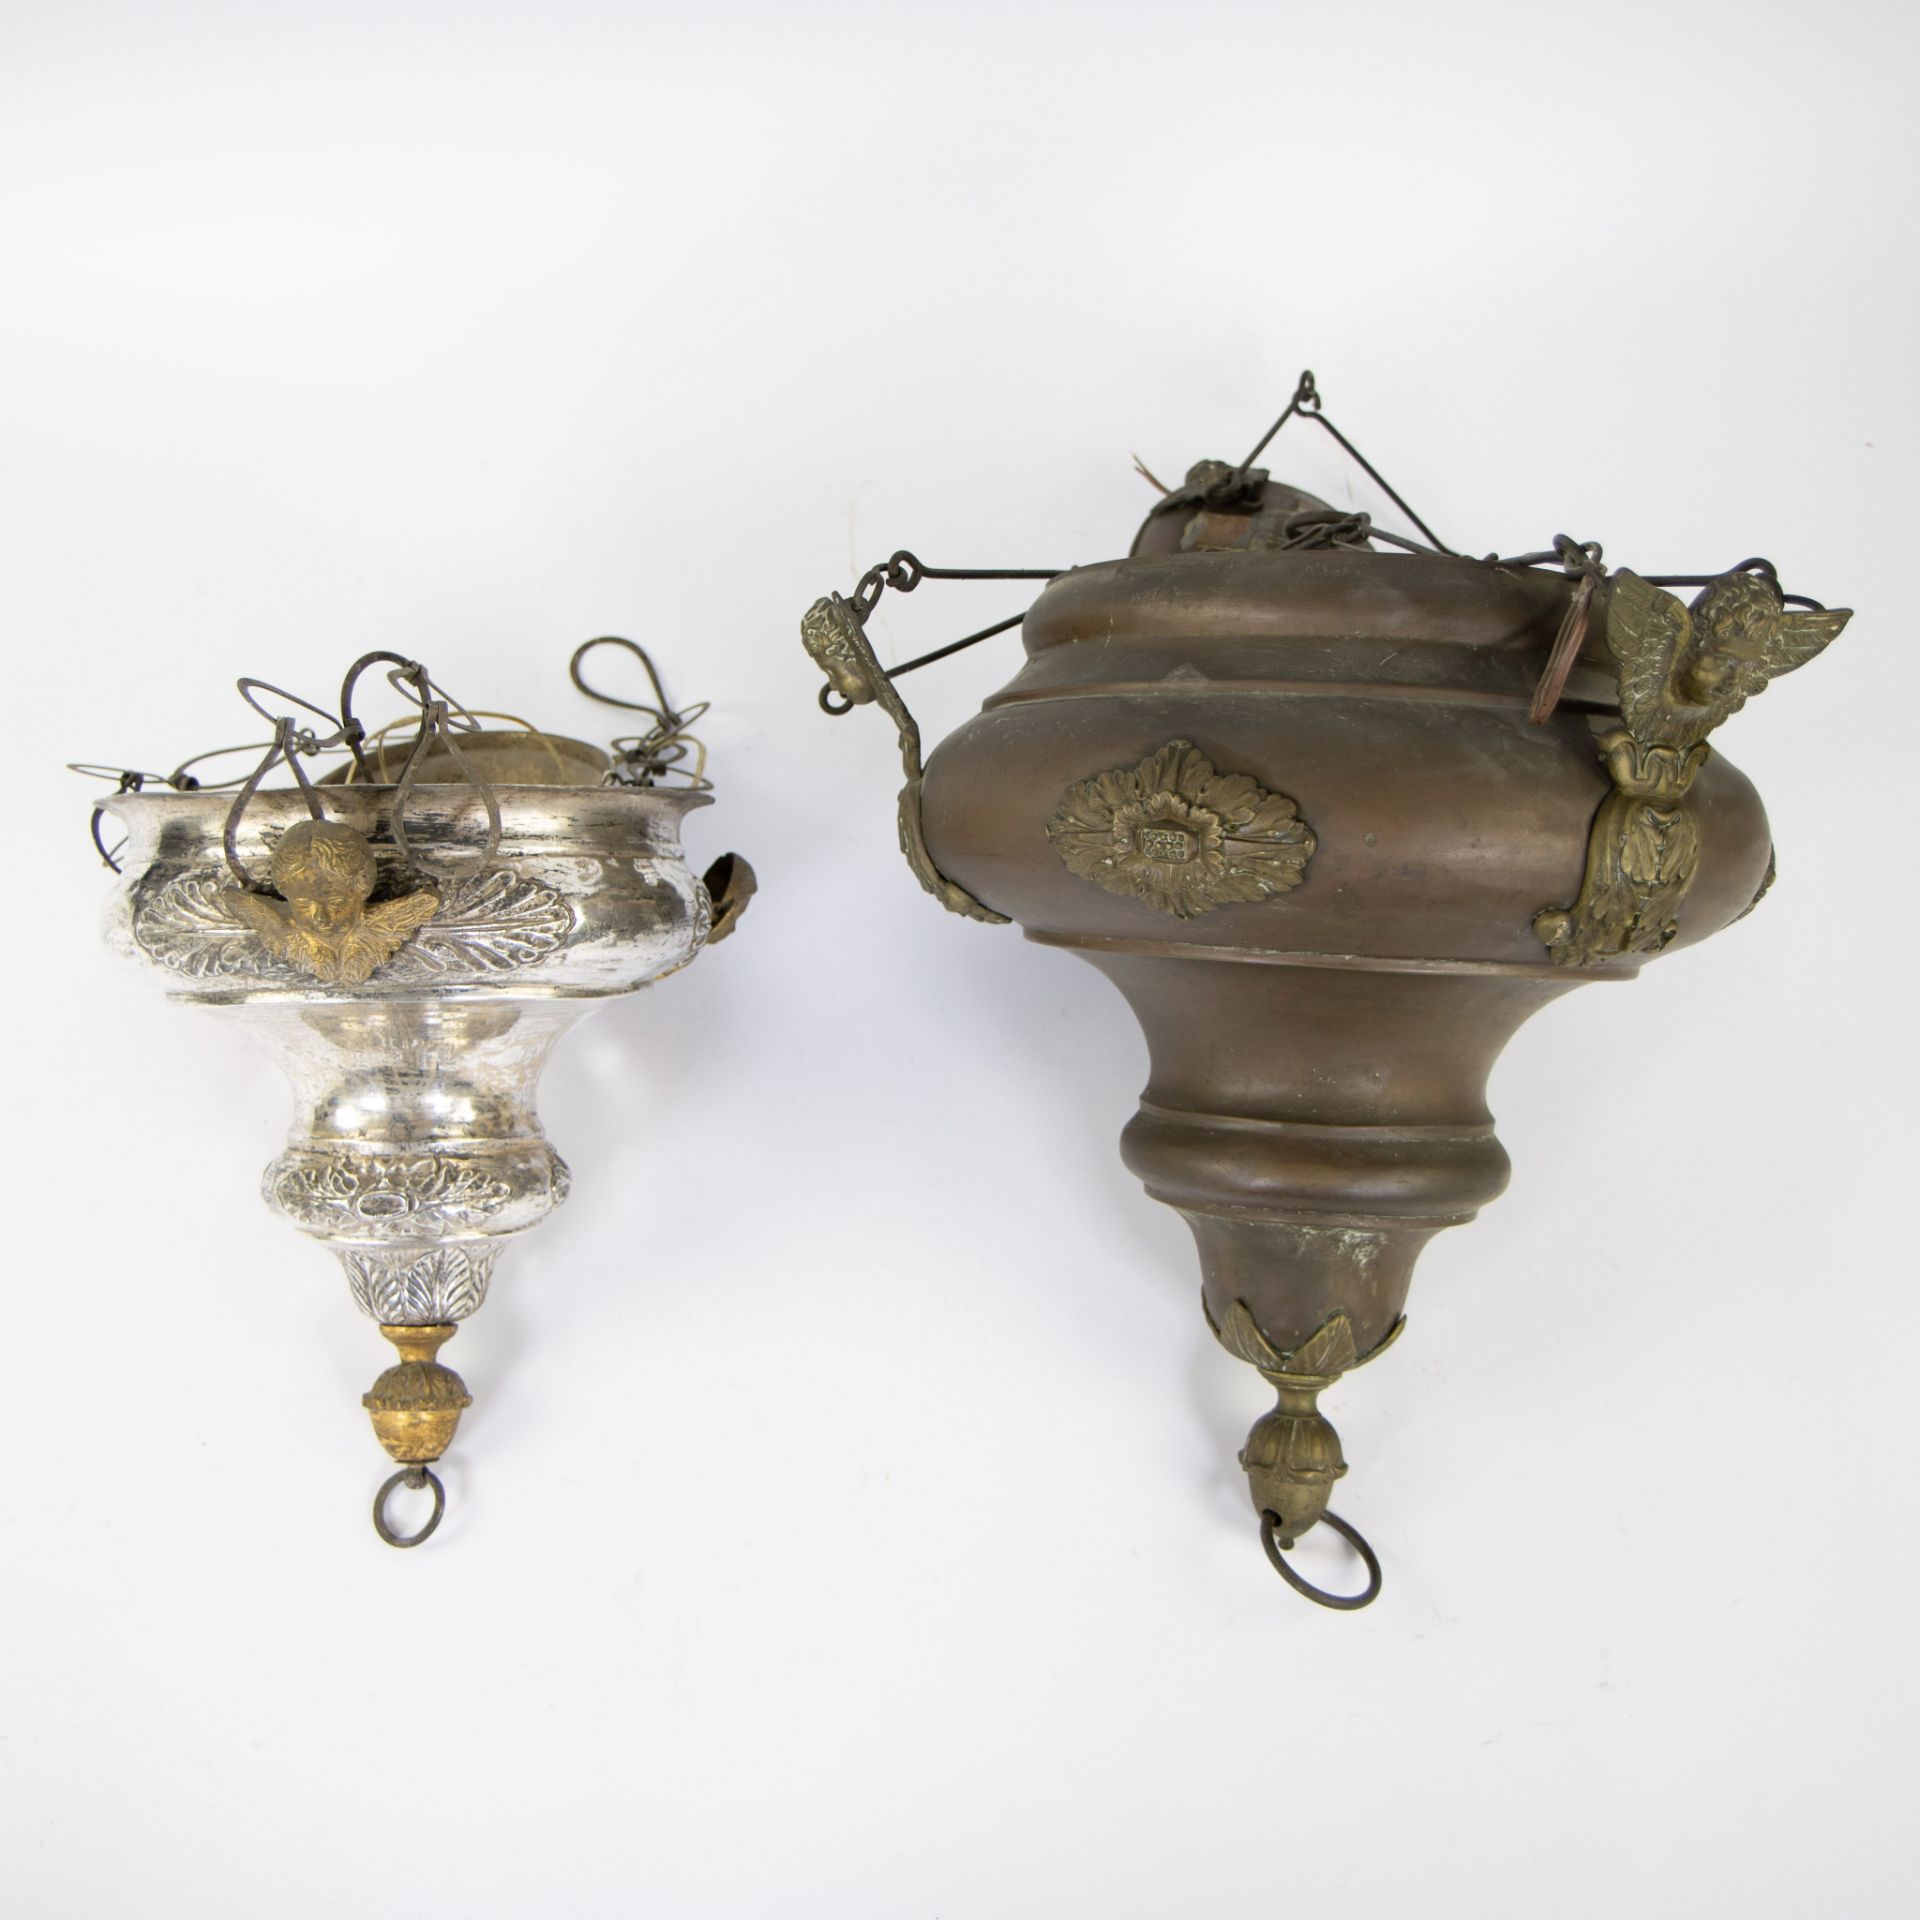 Collection of 2 God lamps 19th century, 1 silvered lamp